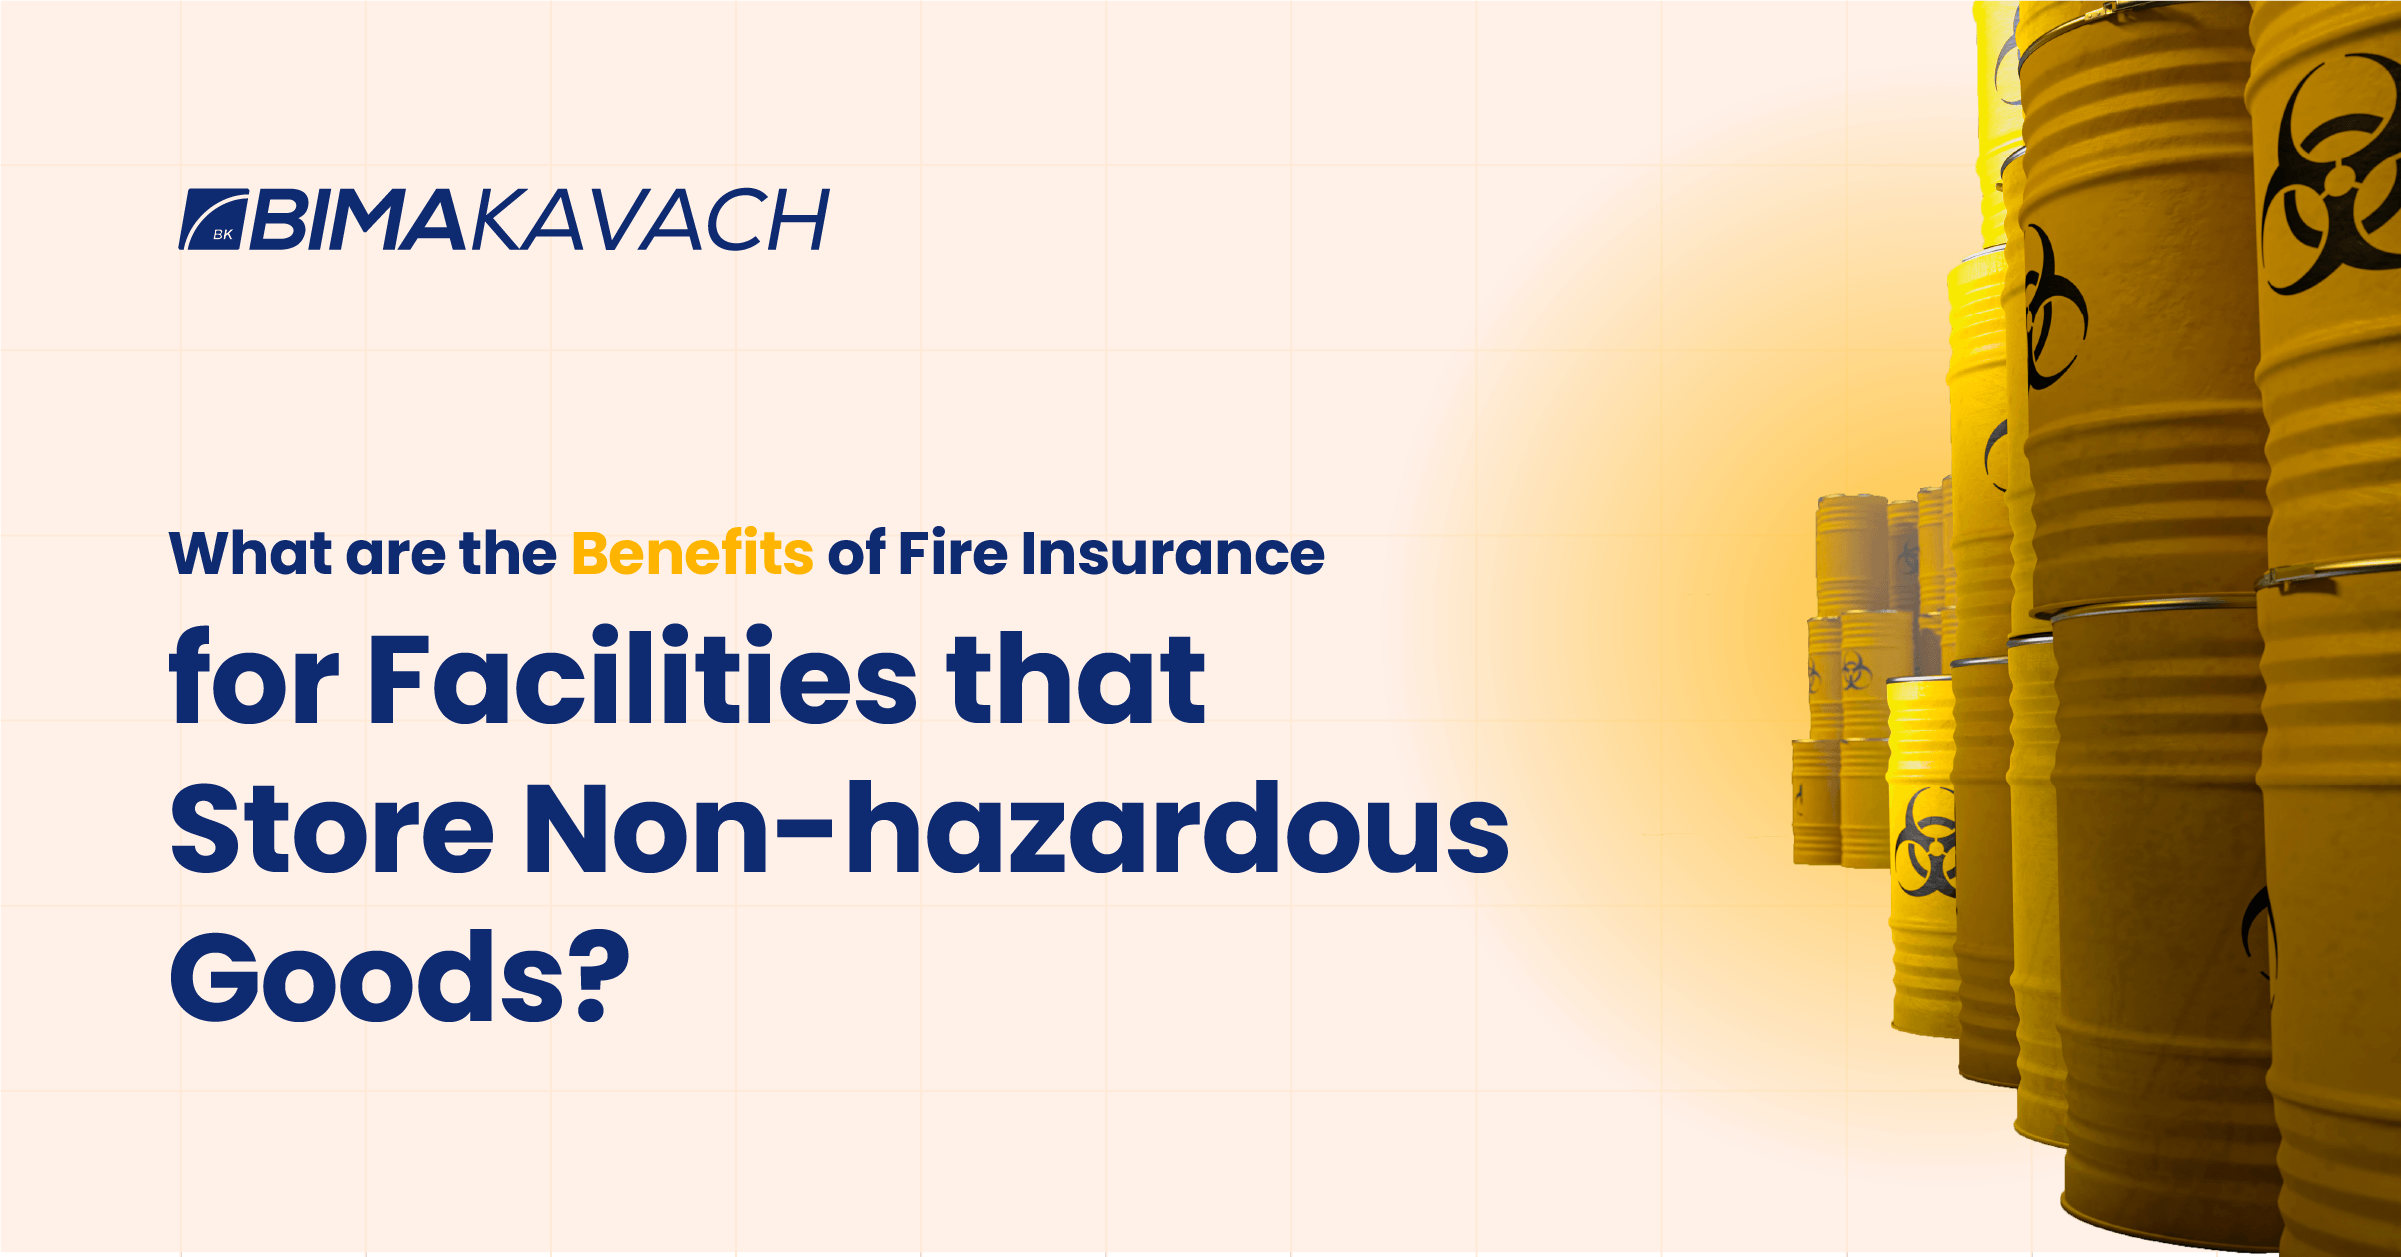 What are the Benefits of Fire Insurance for Facilities that Store Non-hazardous Goods?